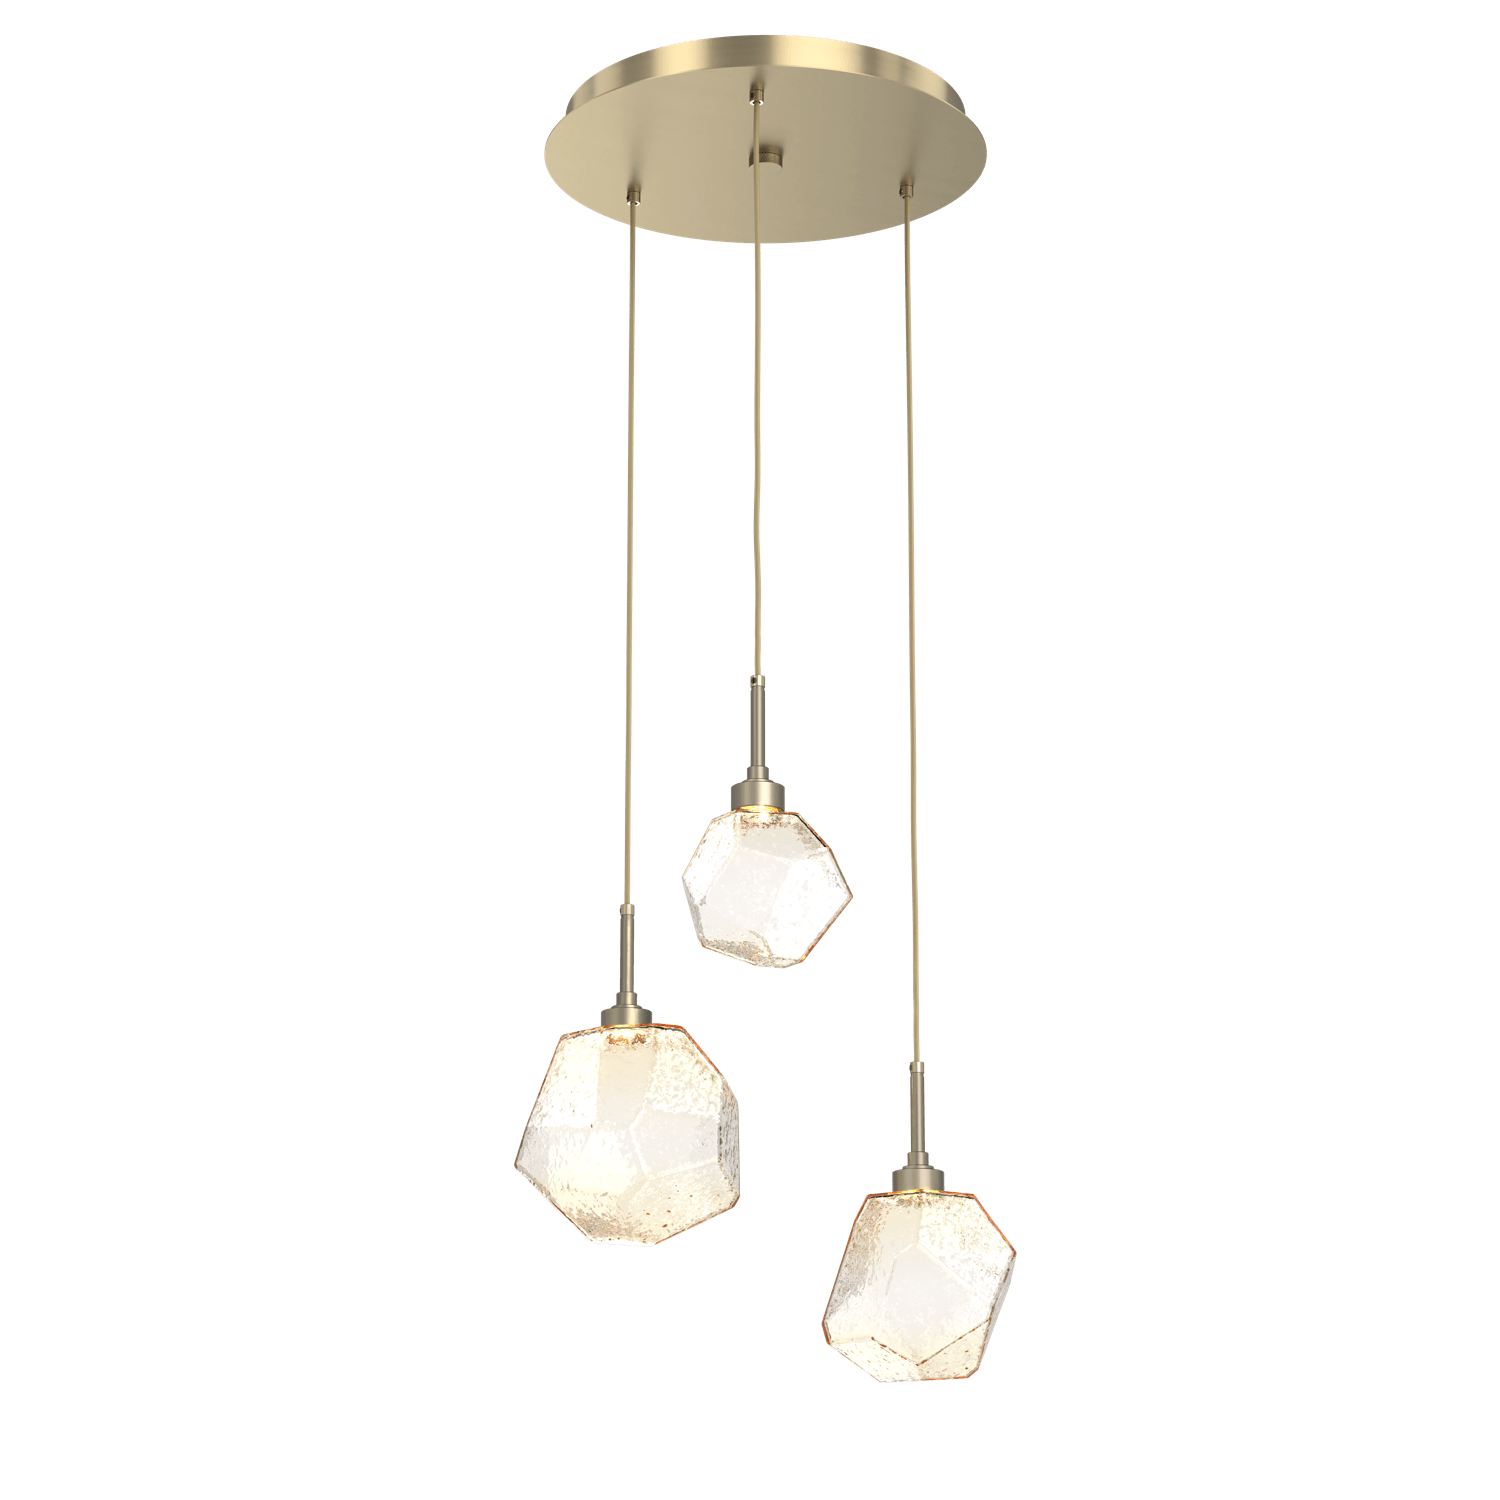 CHB0039-03-HB-A-Hammerton-Studio-Gem-3-light-round-pendant-chandelier-with-heritage-brass-finish-and-amber-blown-glass-shades-and-LED-lamping